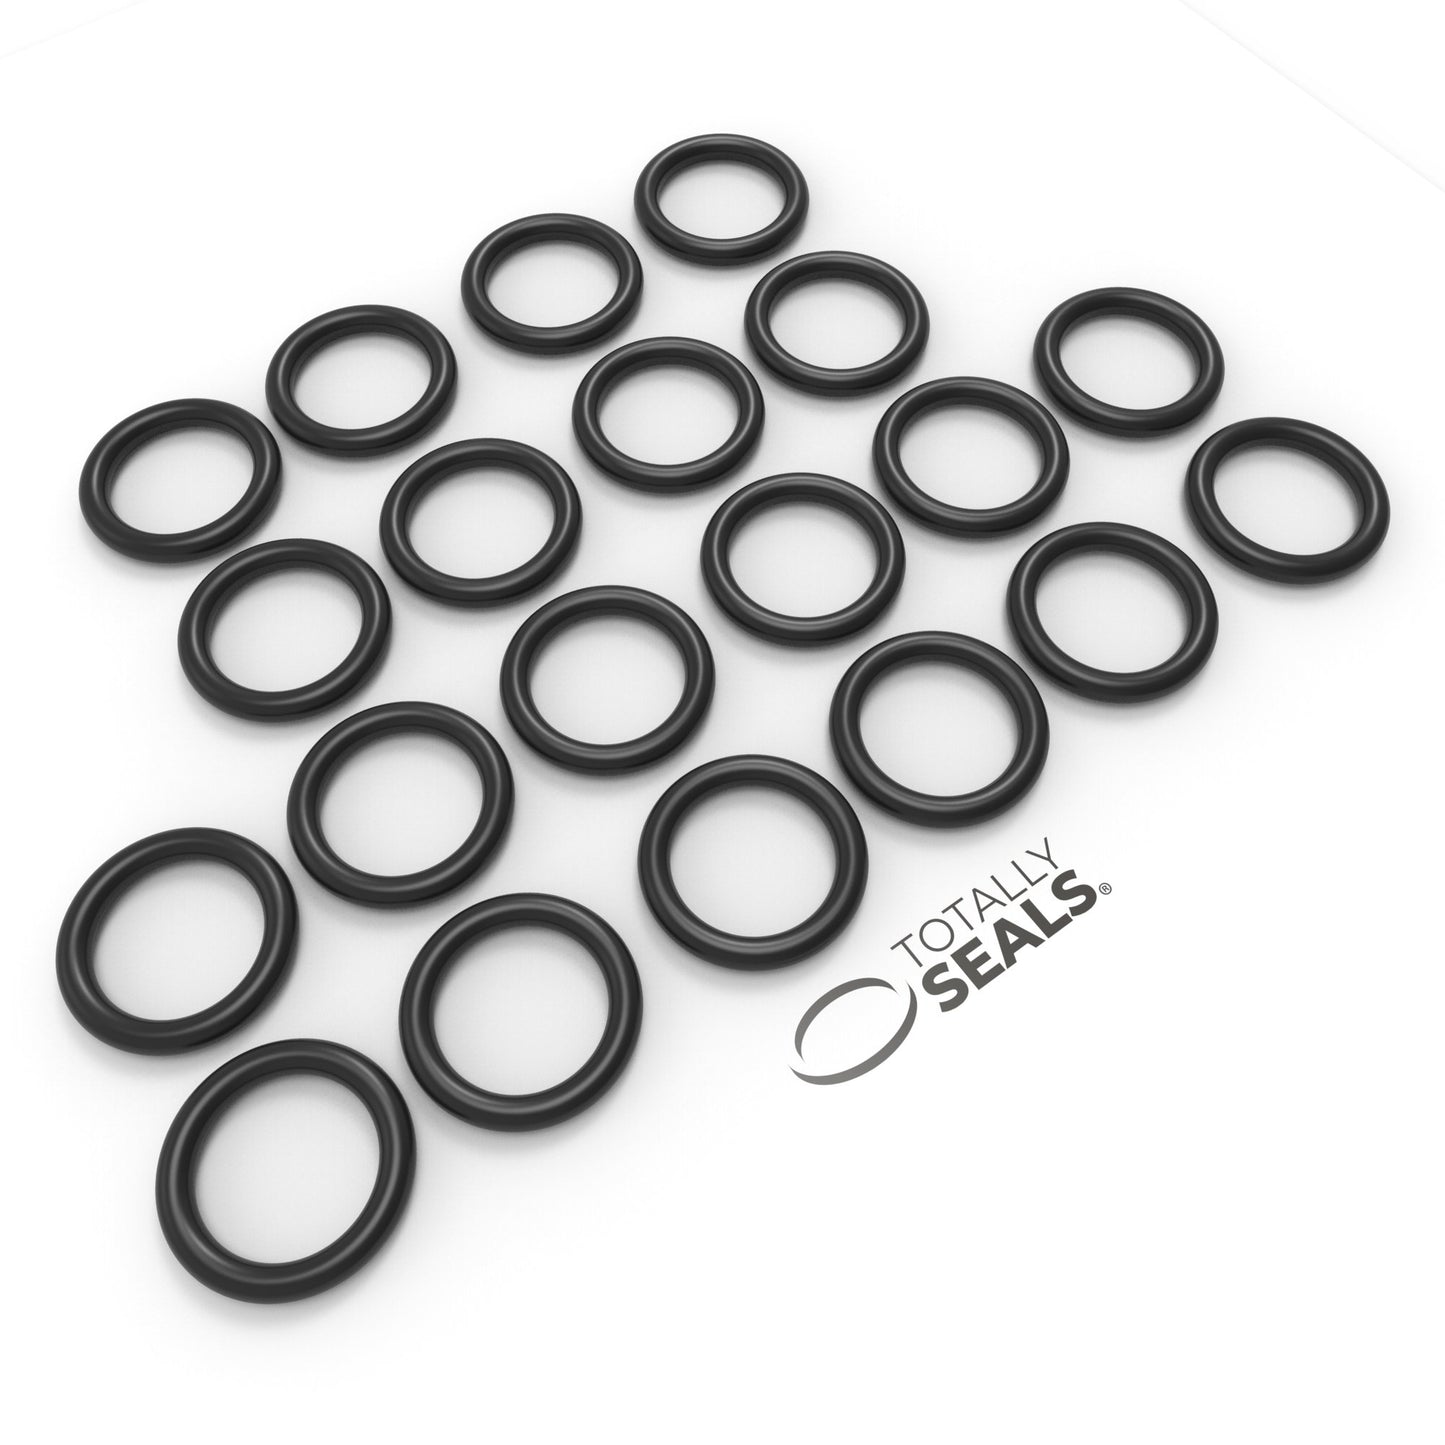 46mm x 3mm (52mm OD) Nitrile O-Rings - Totally Seals®